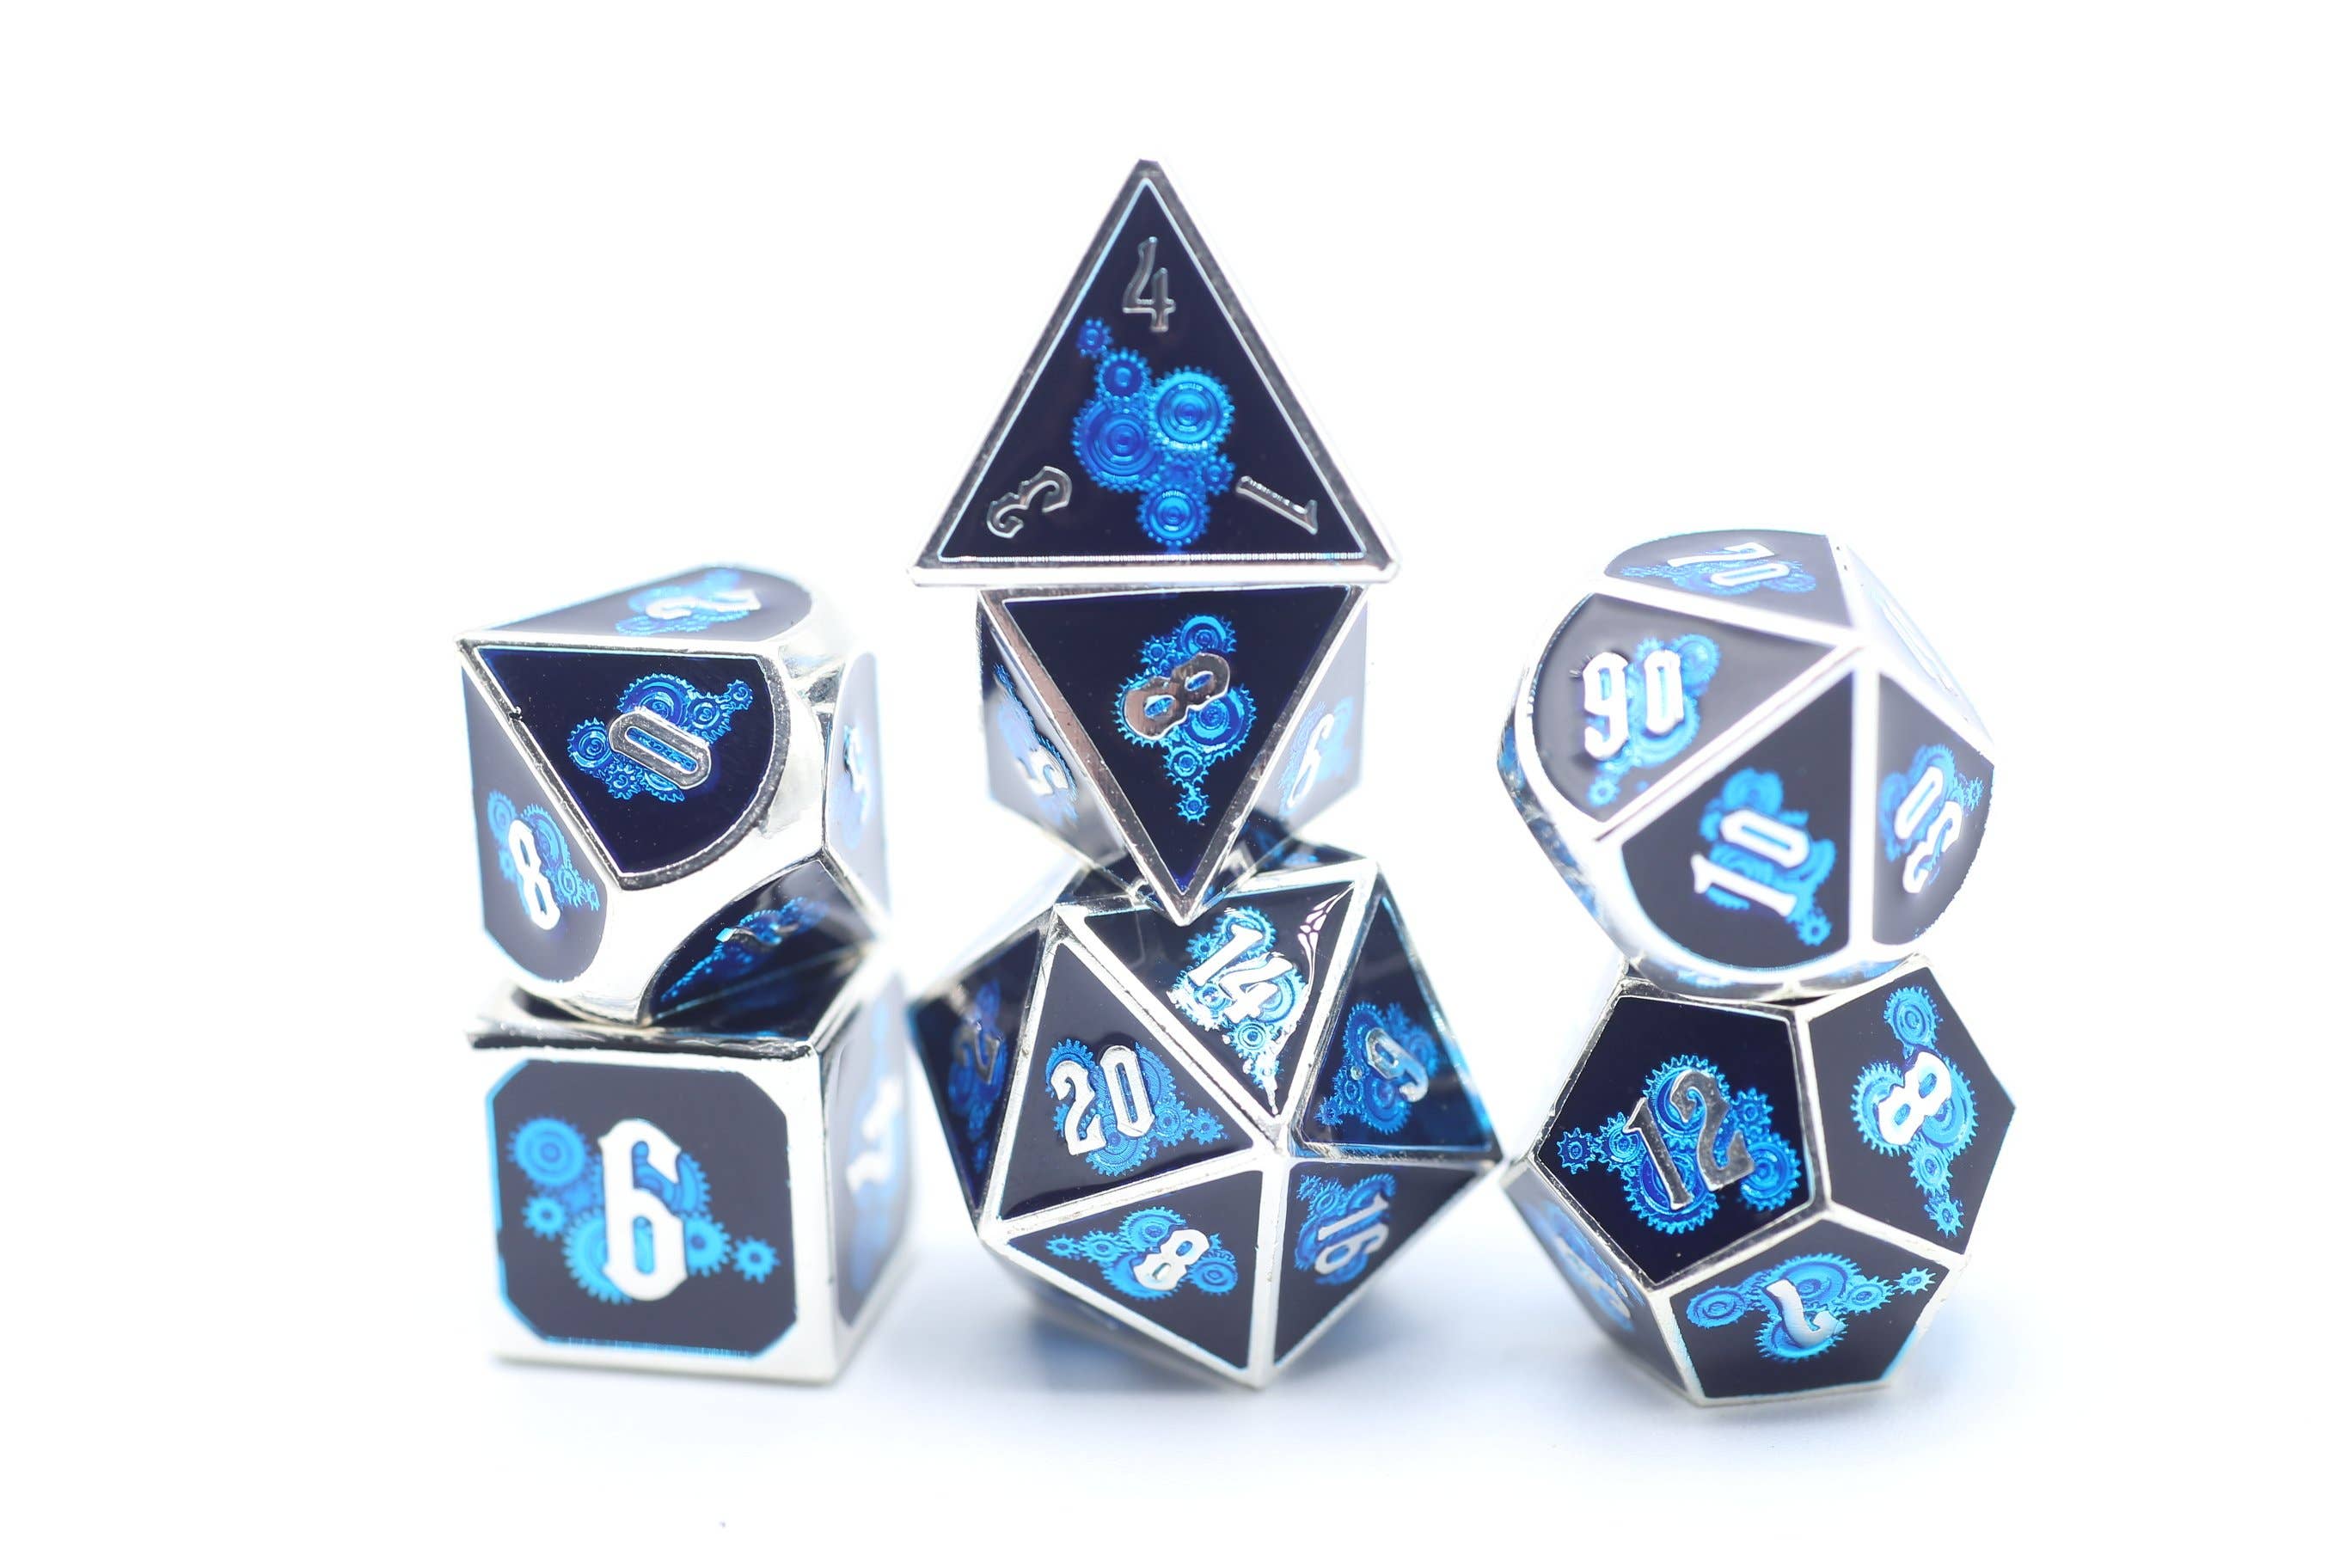 HY00127 Solid Metal Blue Gear Dice set - Bards & Cards